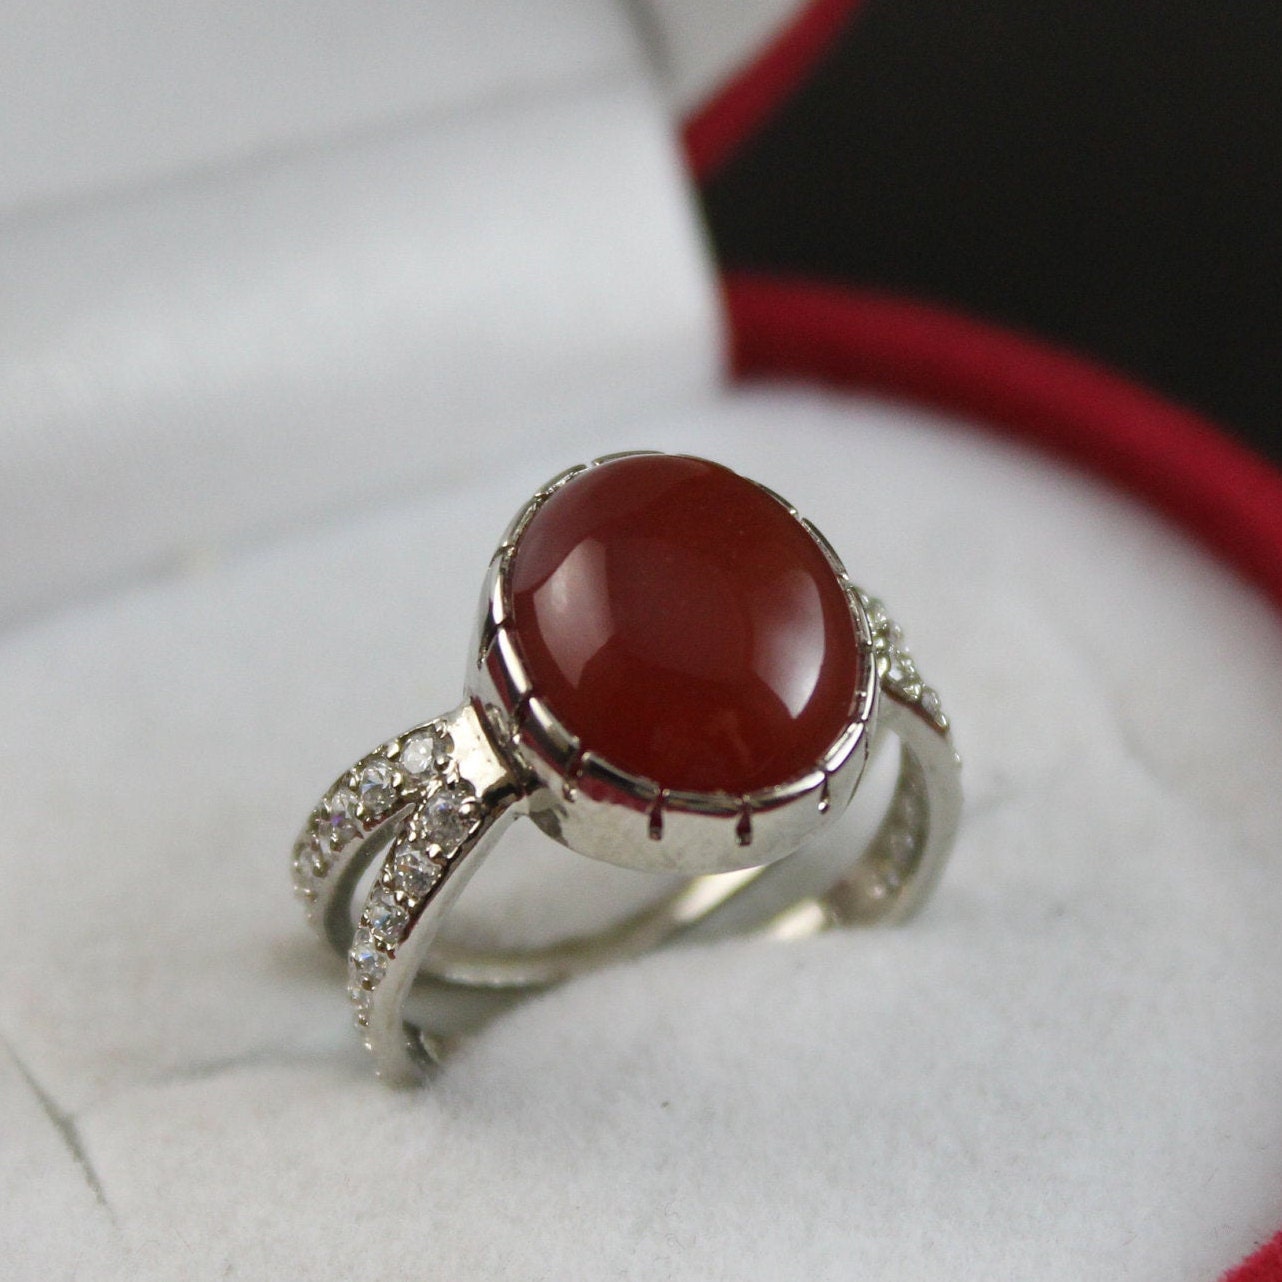 A++ Handmade Genuine Natural Yellow Agate Aqeeq 925 Sterling Silver Women  Ring | eBay